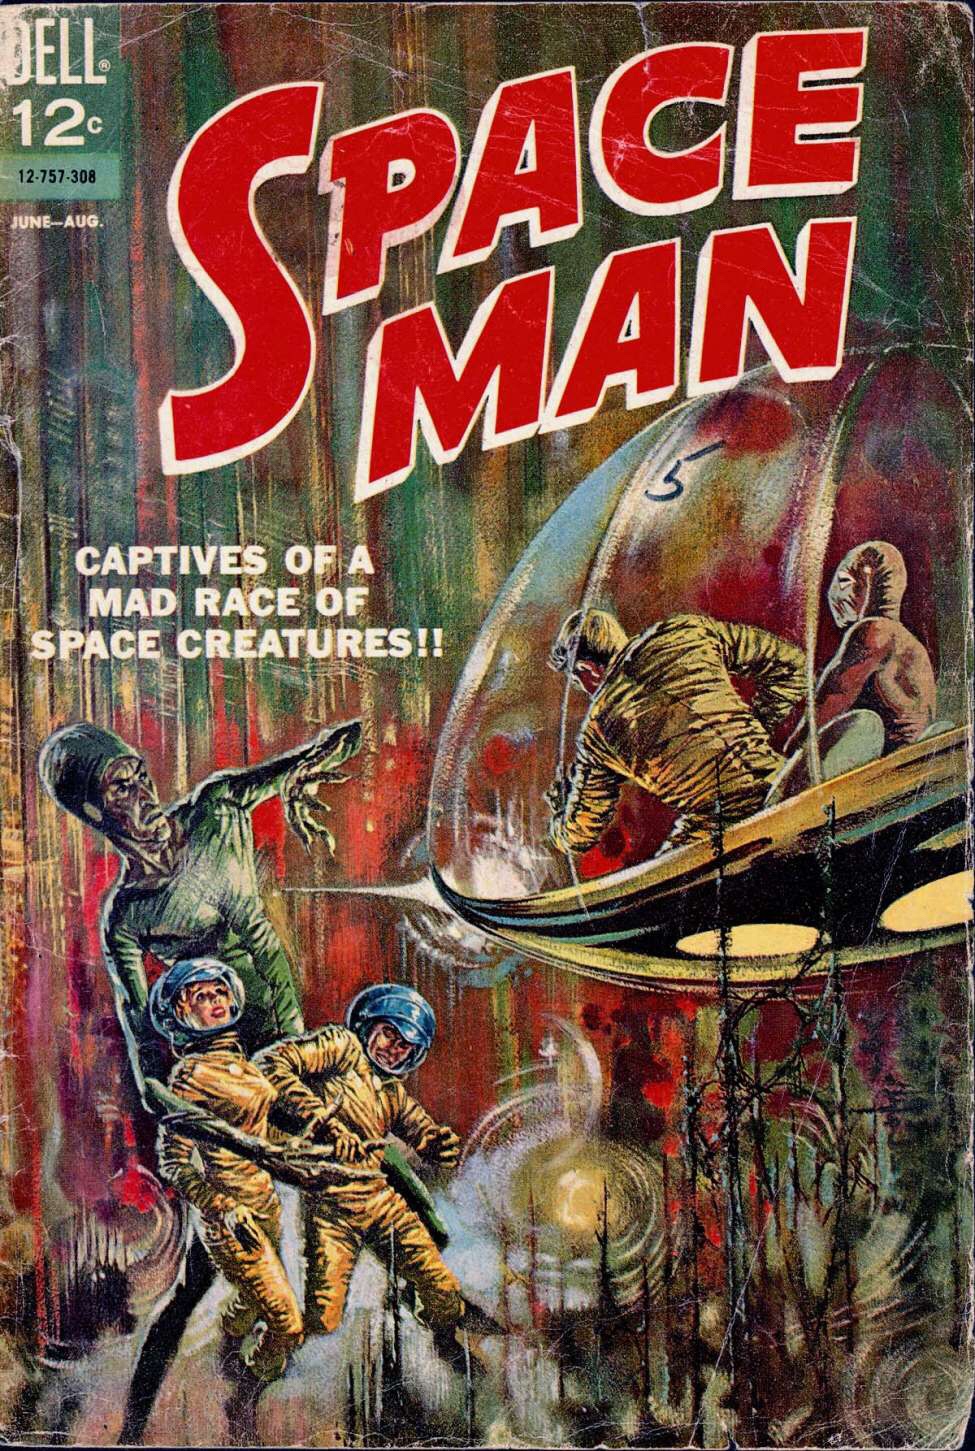 Space Man #5 - Dell, 1963